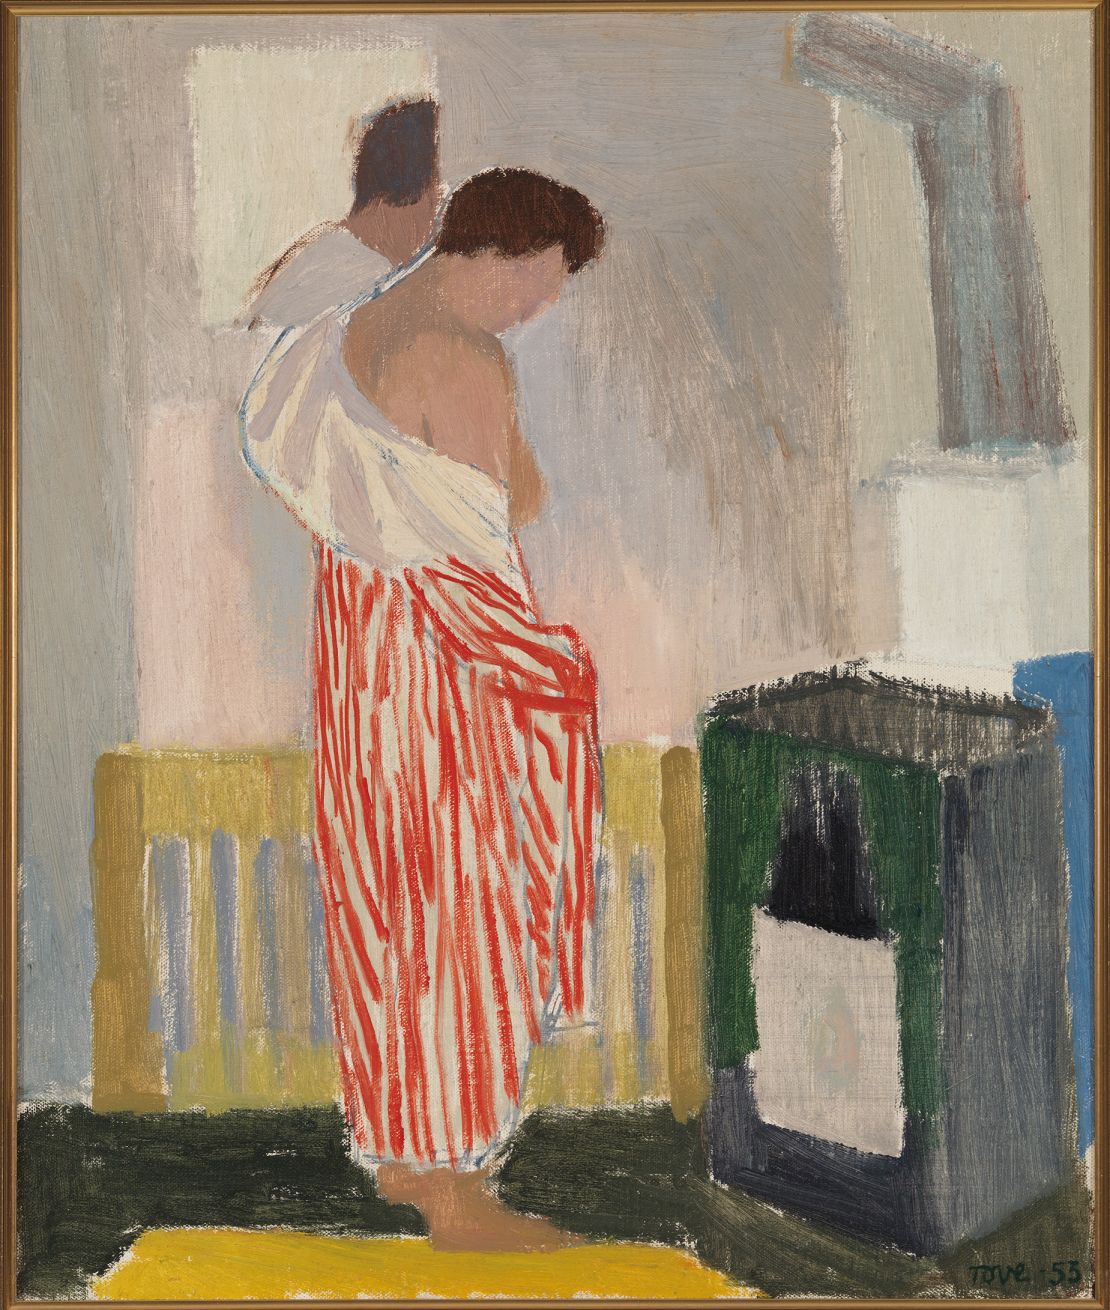 "In the heat of the stove," a work by Jansson from the 1950s.